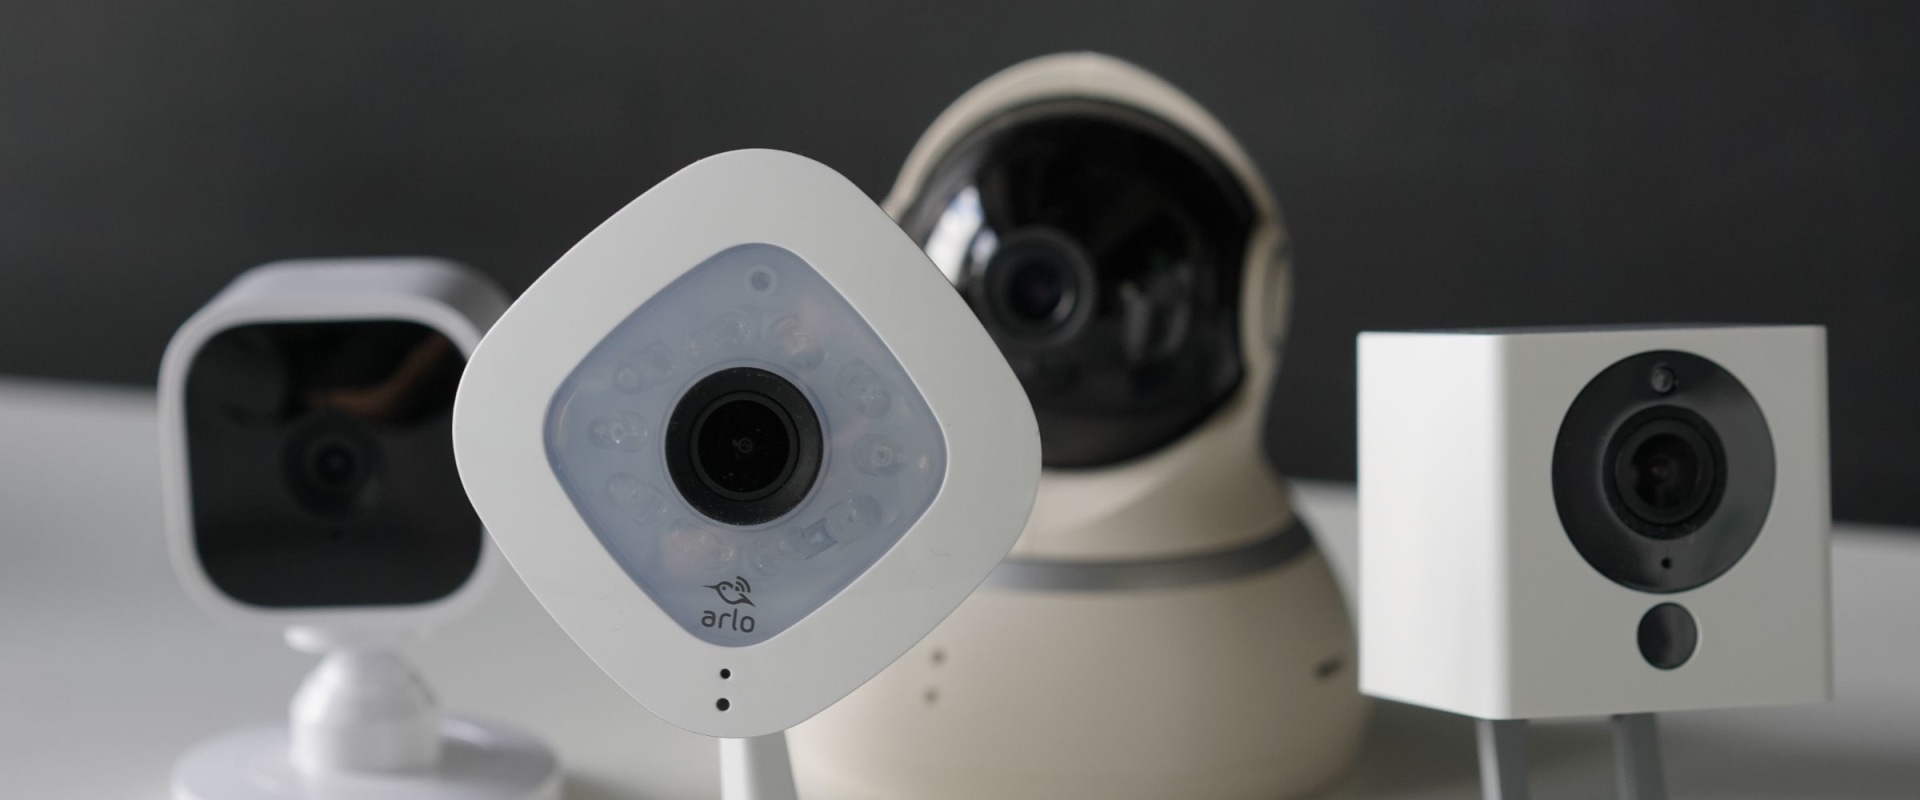 Indoor Security Cameras: What You Need To Know